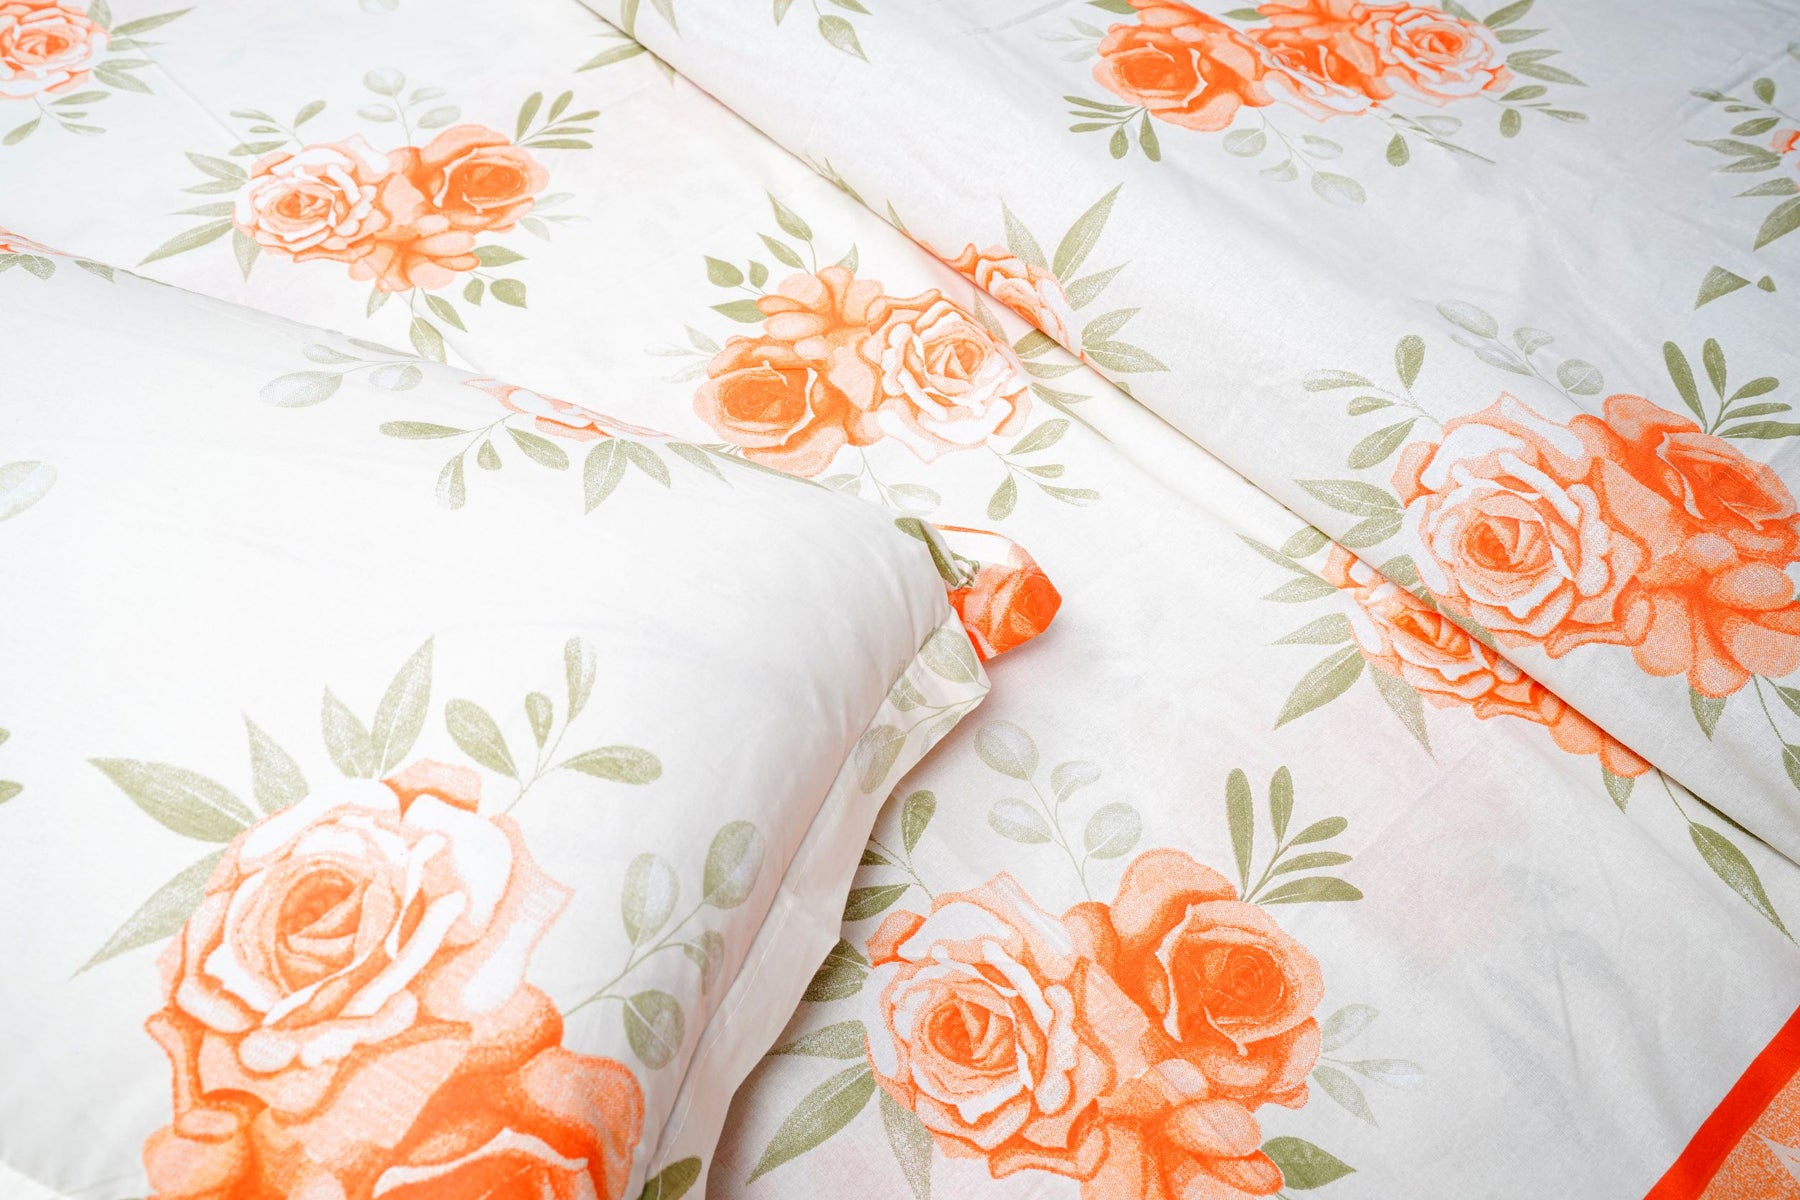 Floral Print Cotton Bedsheet for Queen Size Bed, Ultra Soft Lightweight Breathable & Wrinkle Free comes with 2 Pillow Covers